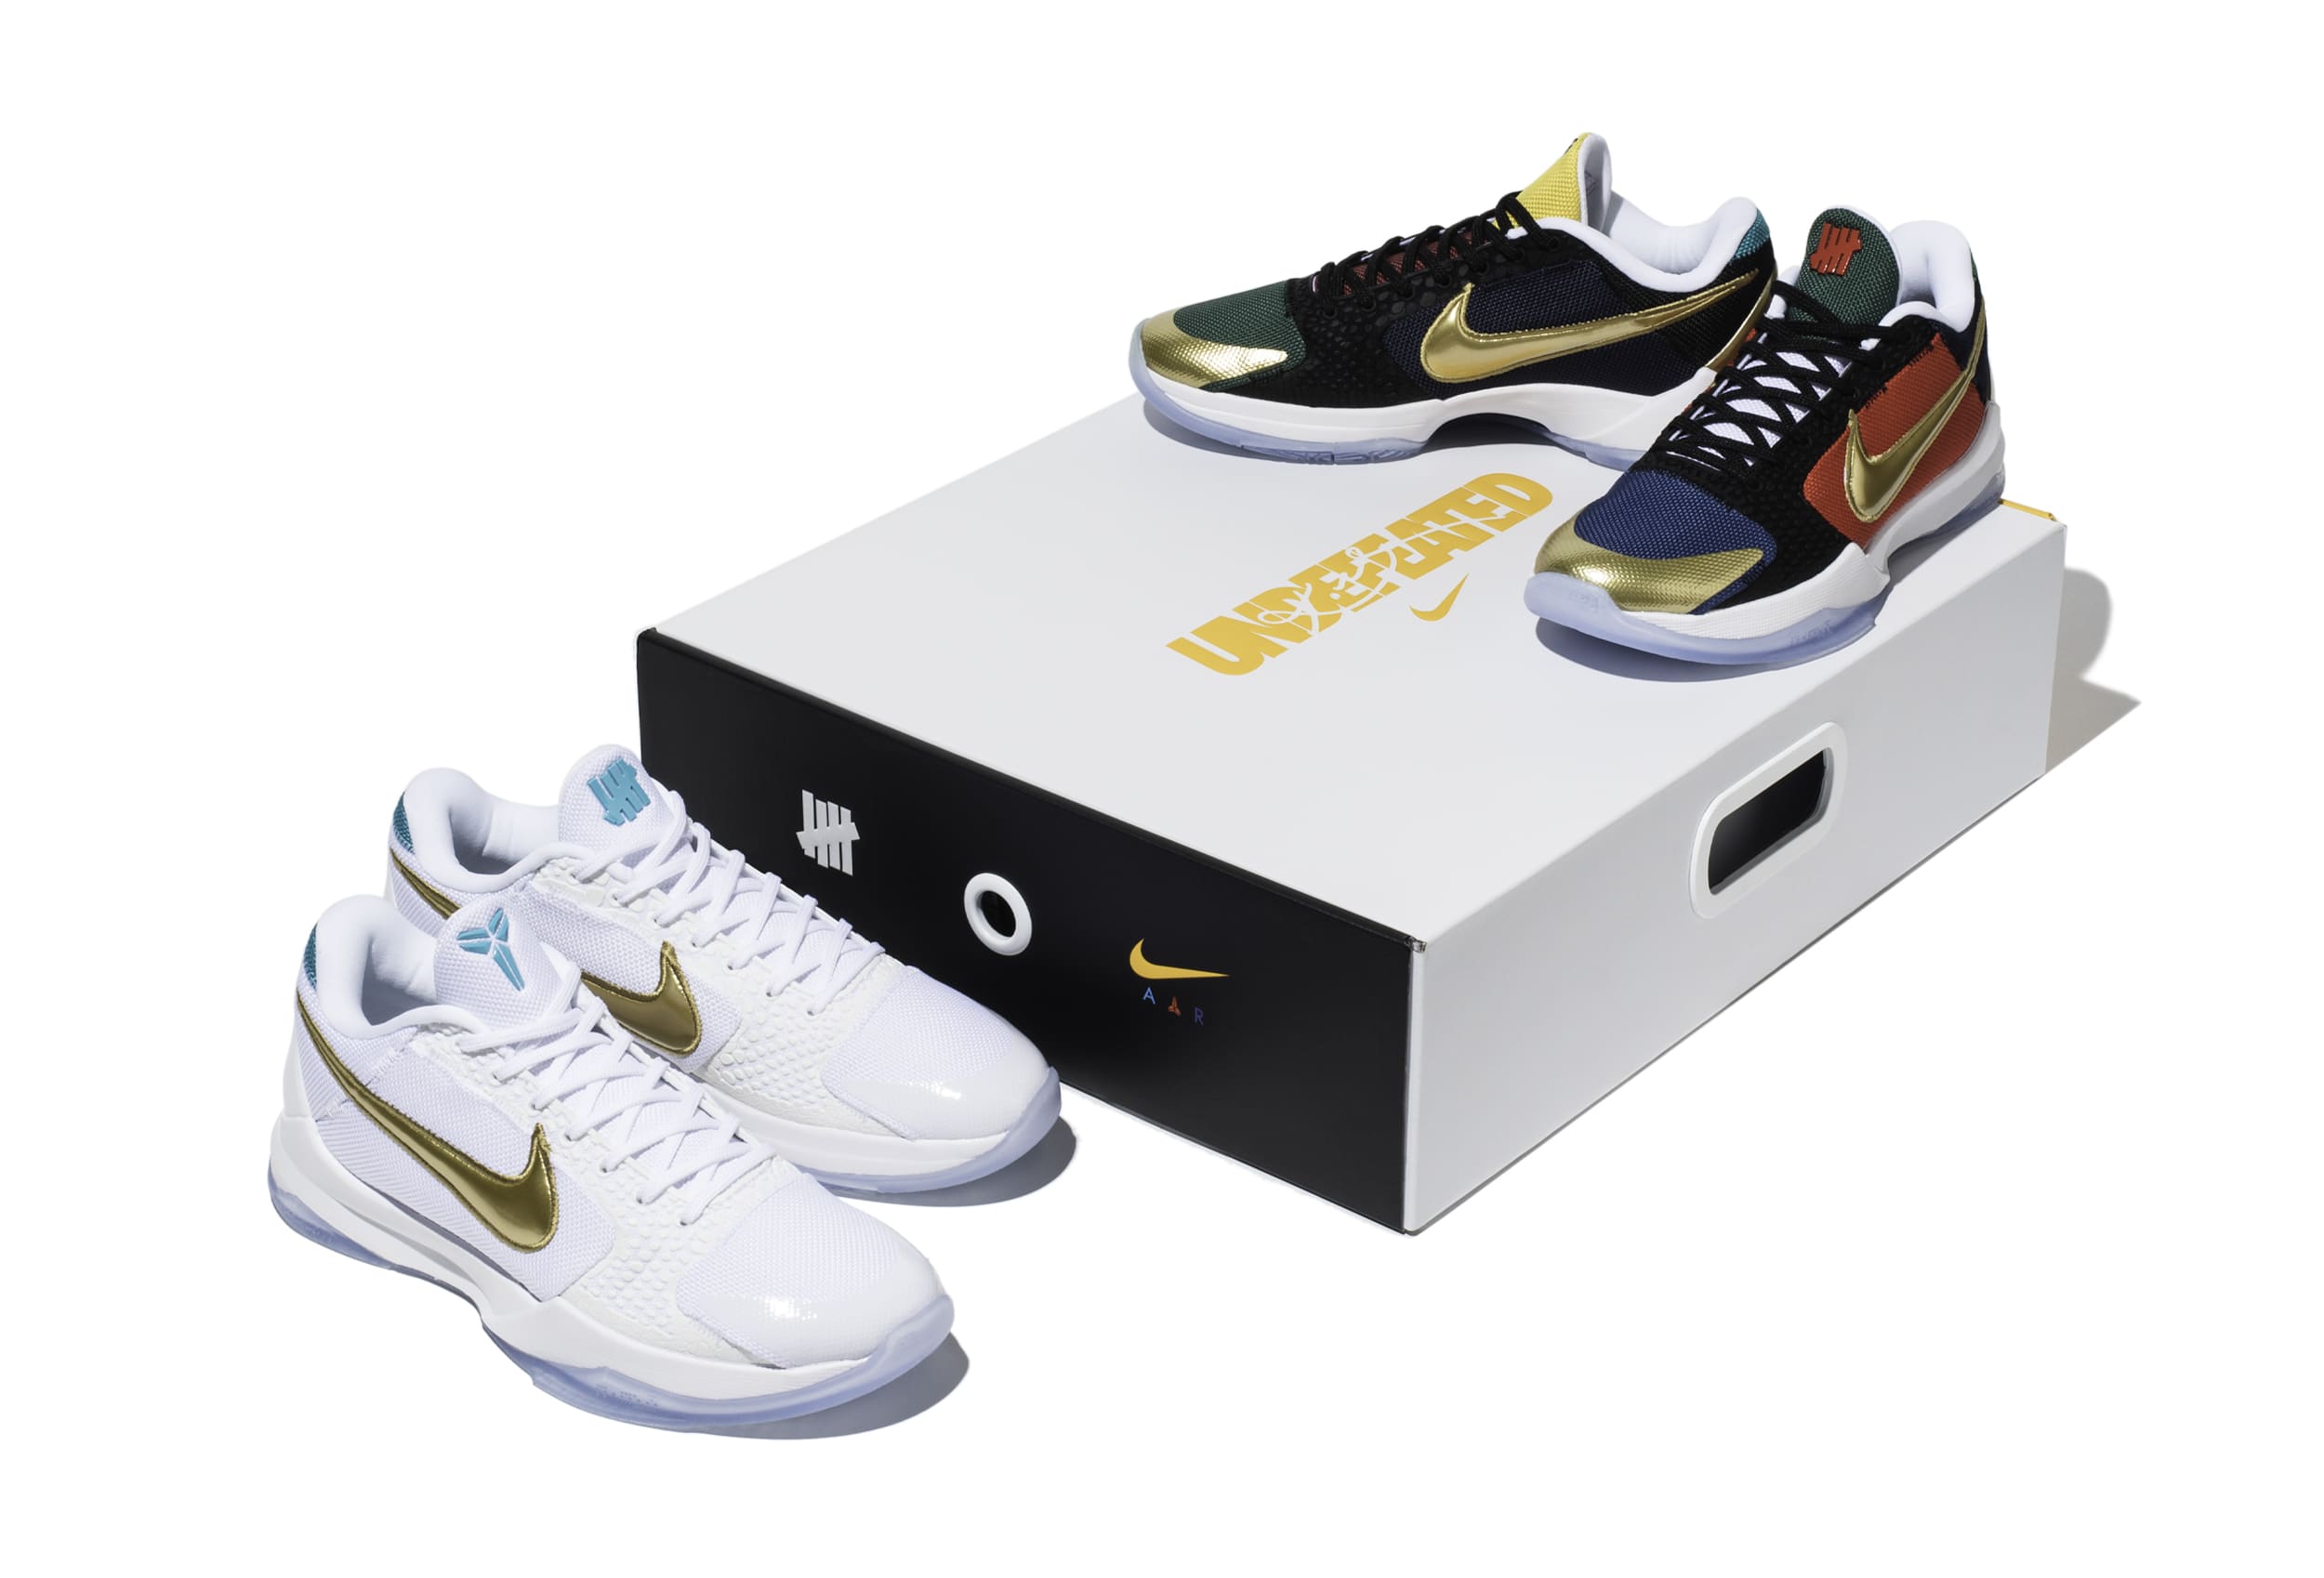 Undefeated x Nike Kobe 5 Proto 'What If' Pack Release Date | Sole Collector